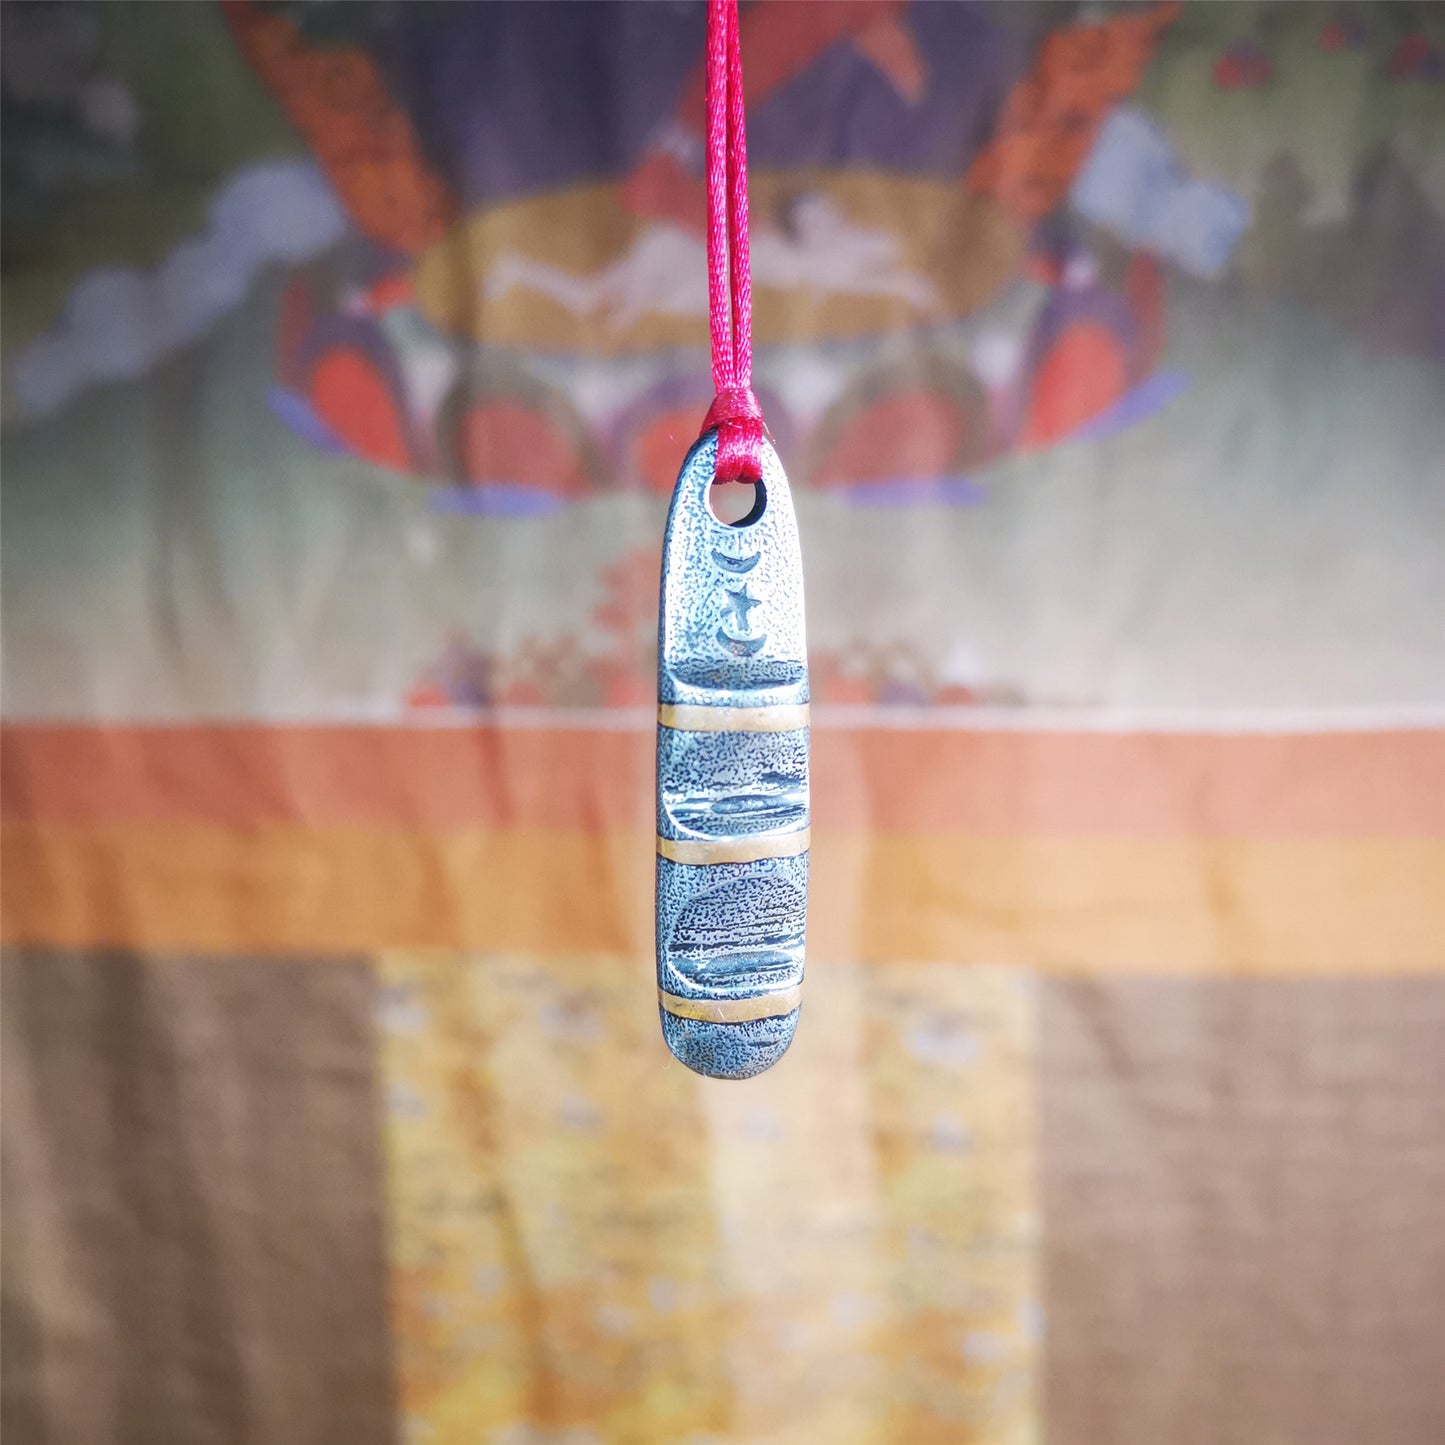 This unique Ladder pendant is made by Tibetan craftsmen. It is made of cold iron and copper, black color,the shape is Tibetan Ladder of Heaven,length is 46mm. You can make it into a pendant,keychain, or just put it on your desk,as an ornament.